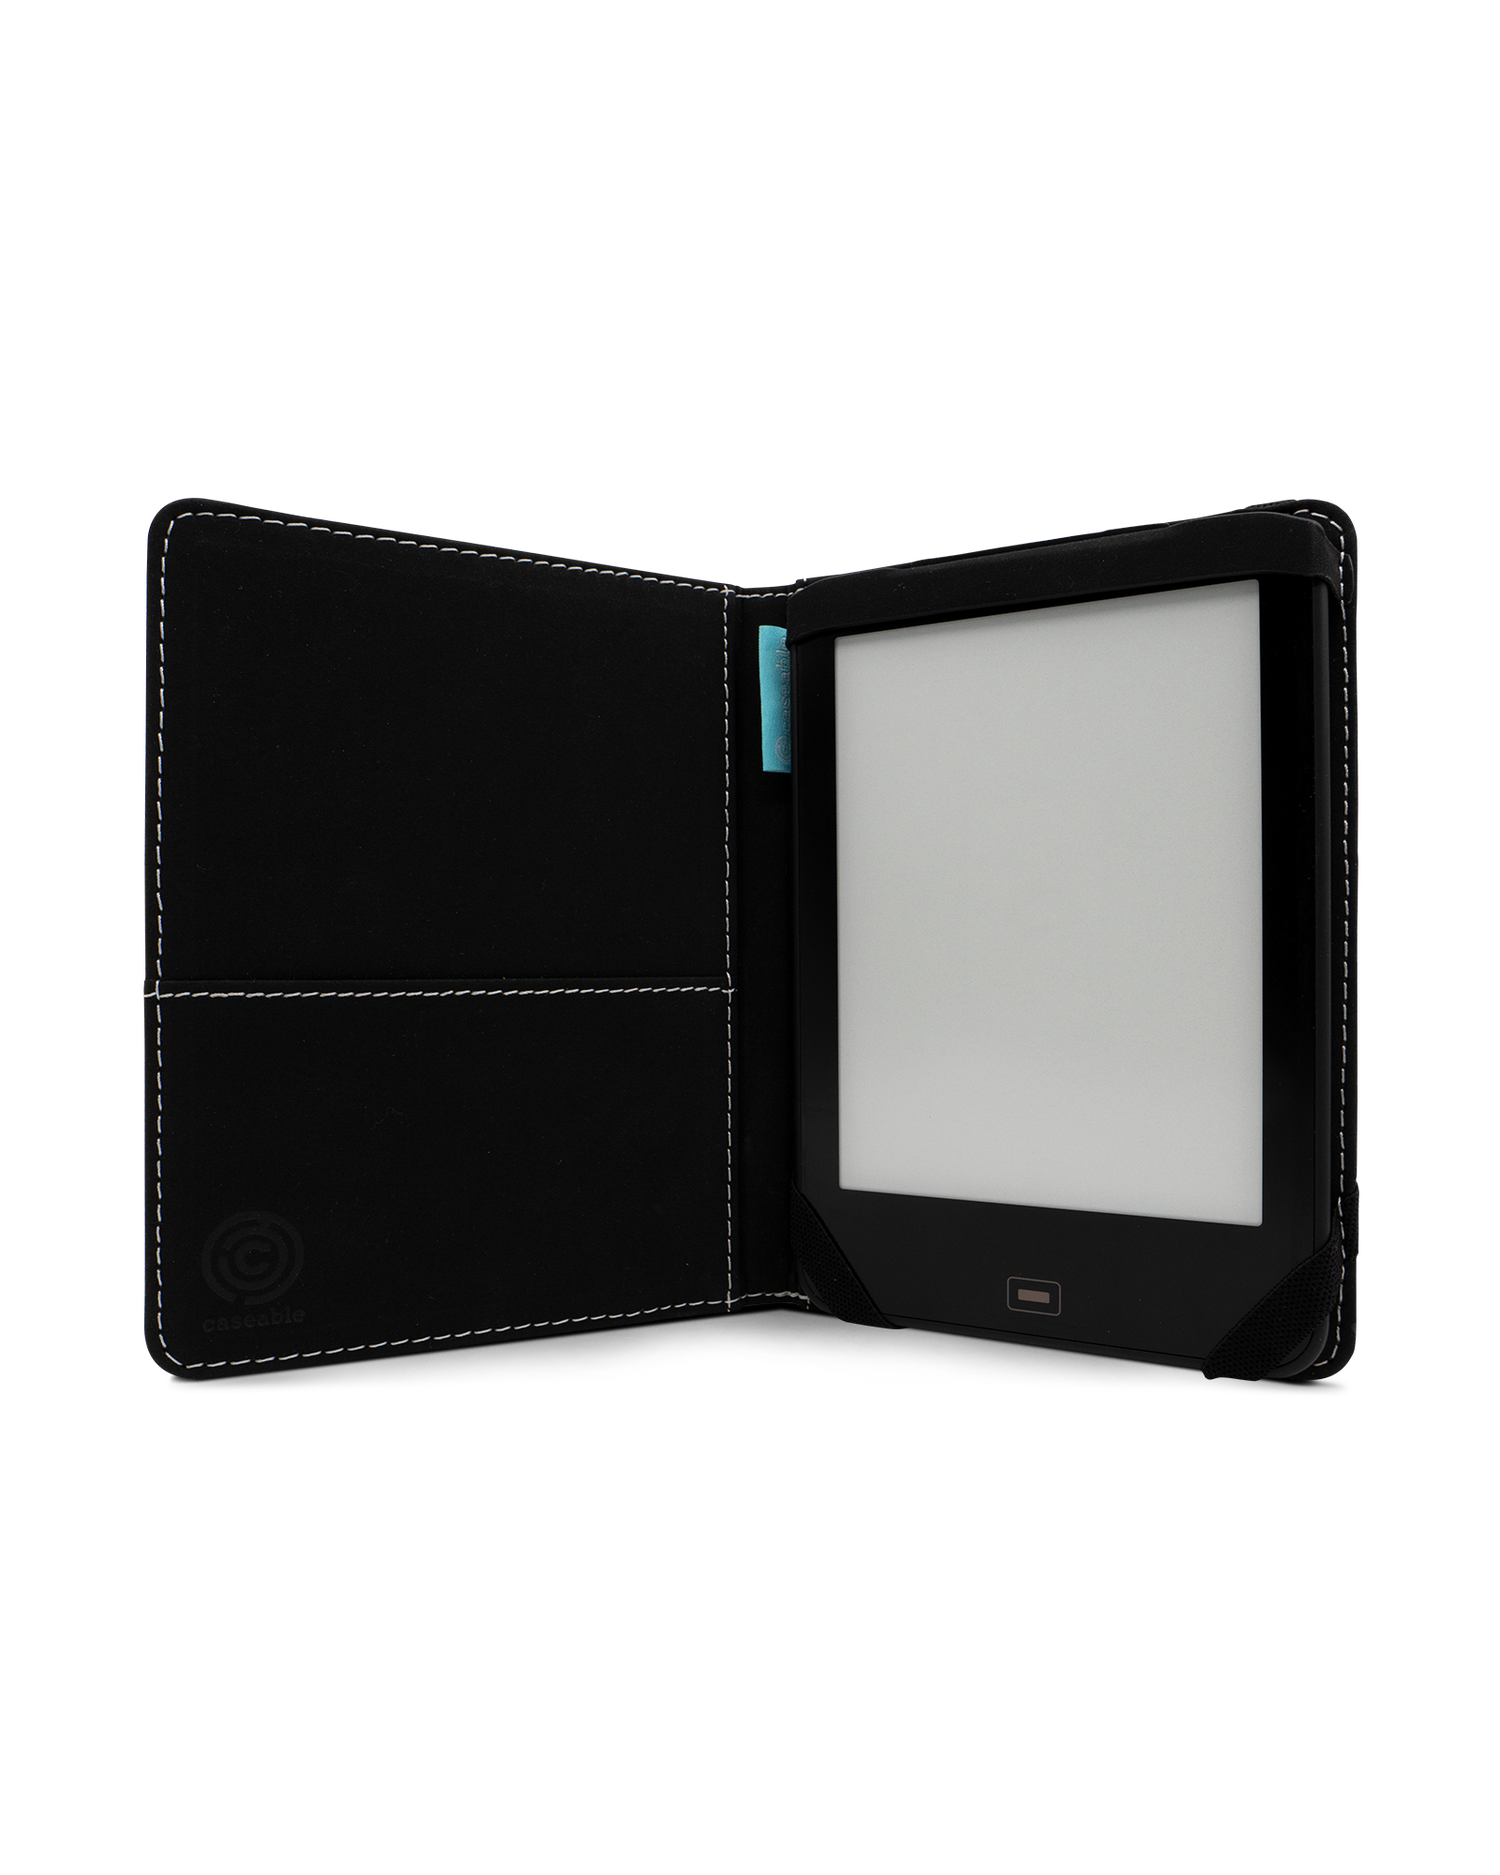 PLUM eReader Case for tolino vision 1 to 4 HD: Opened interior view